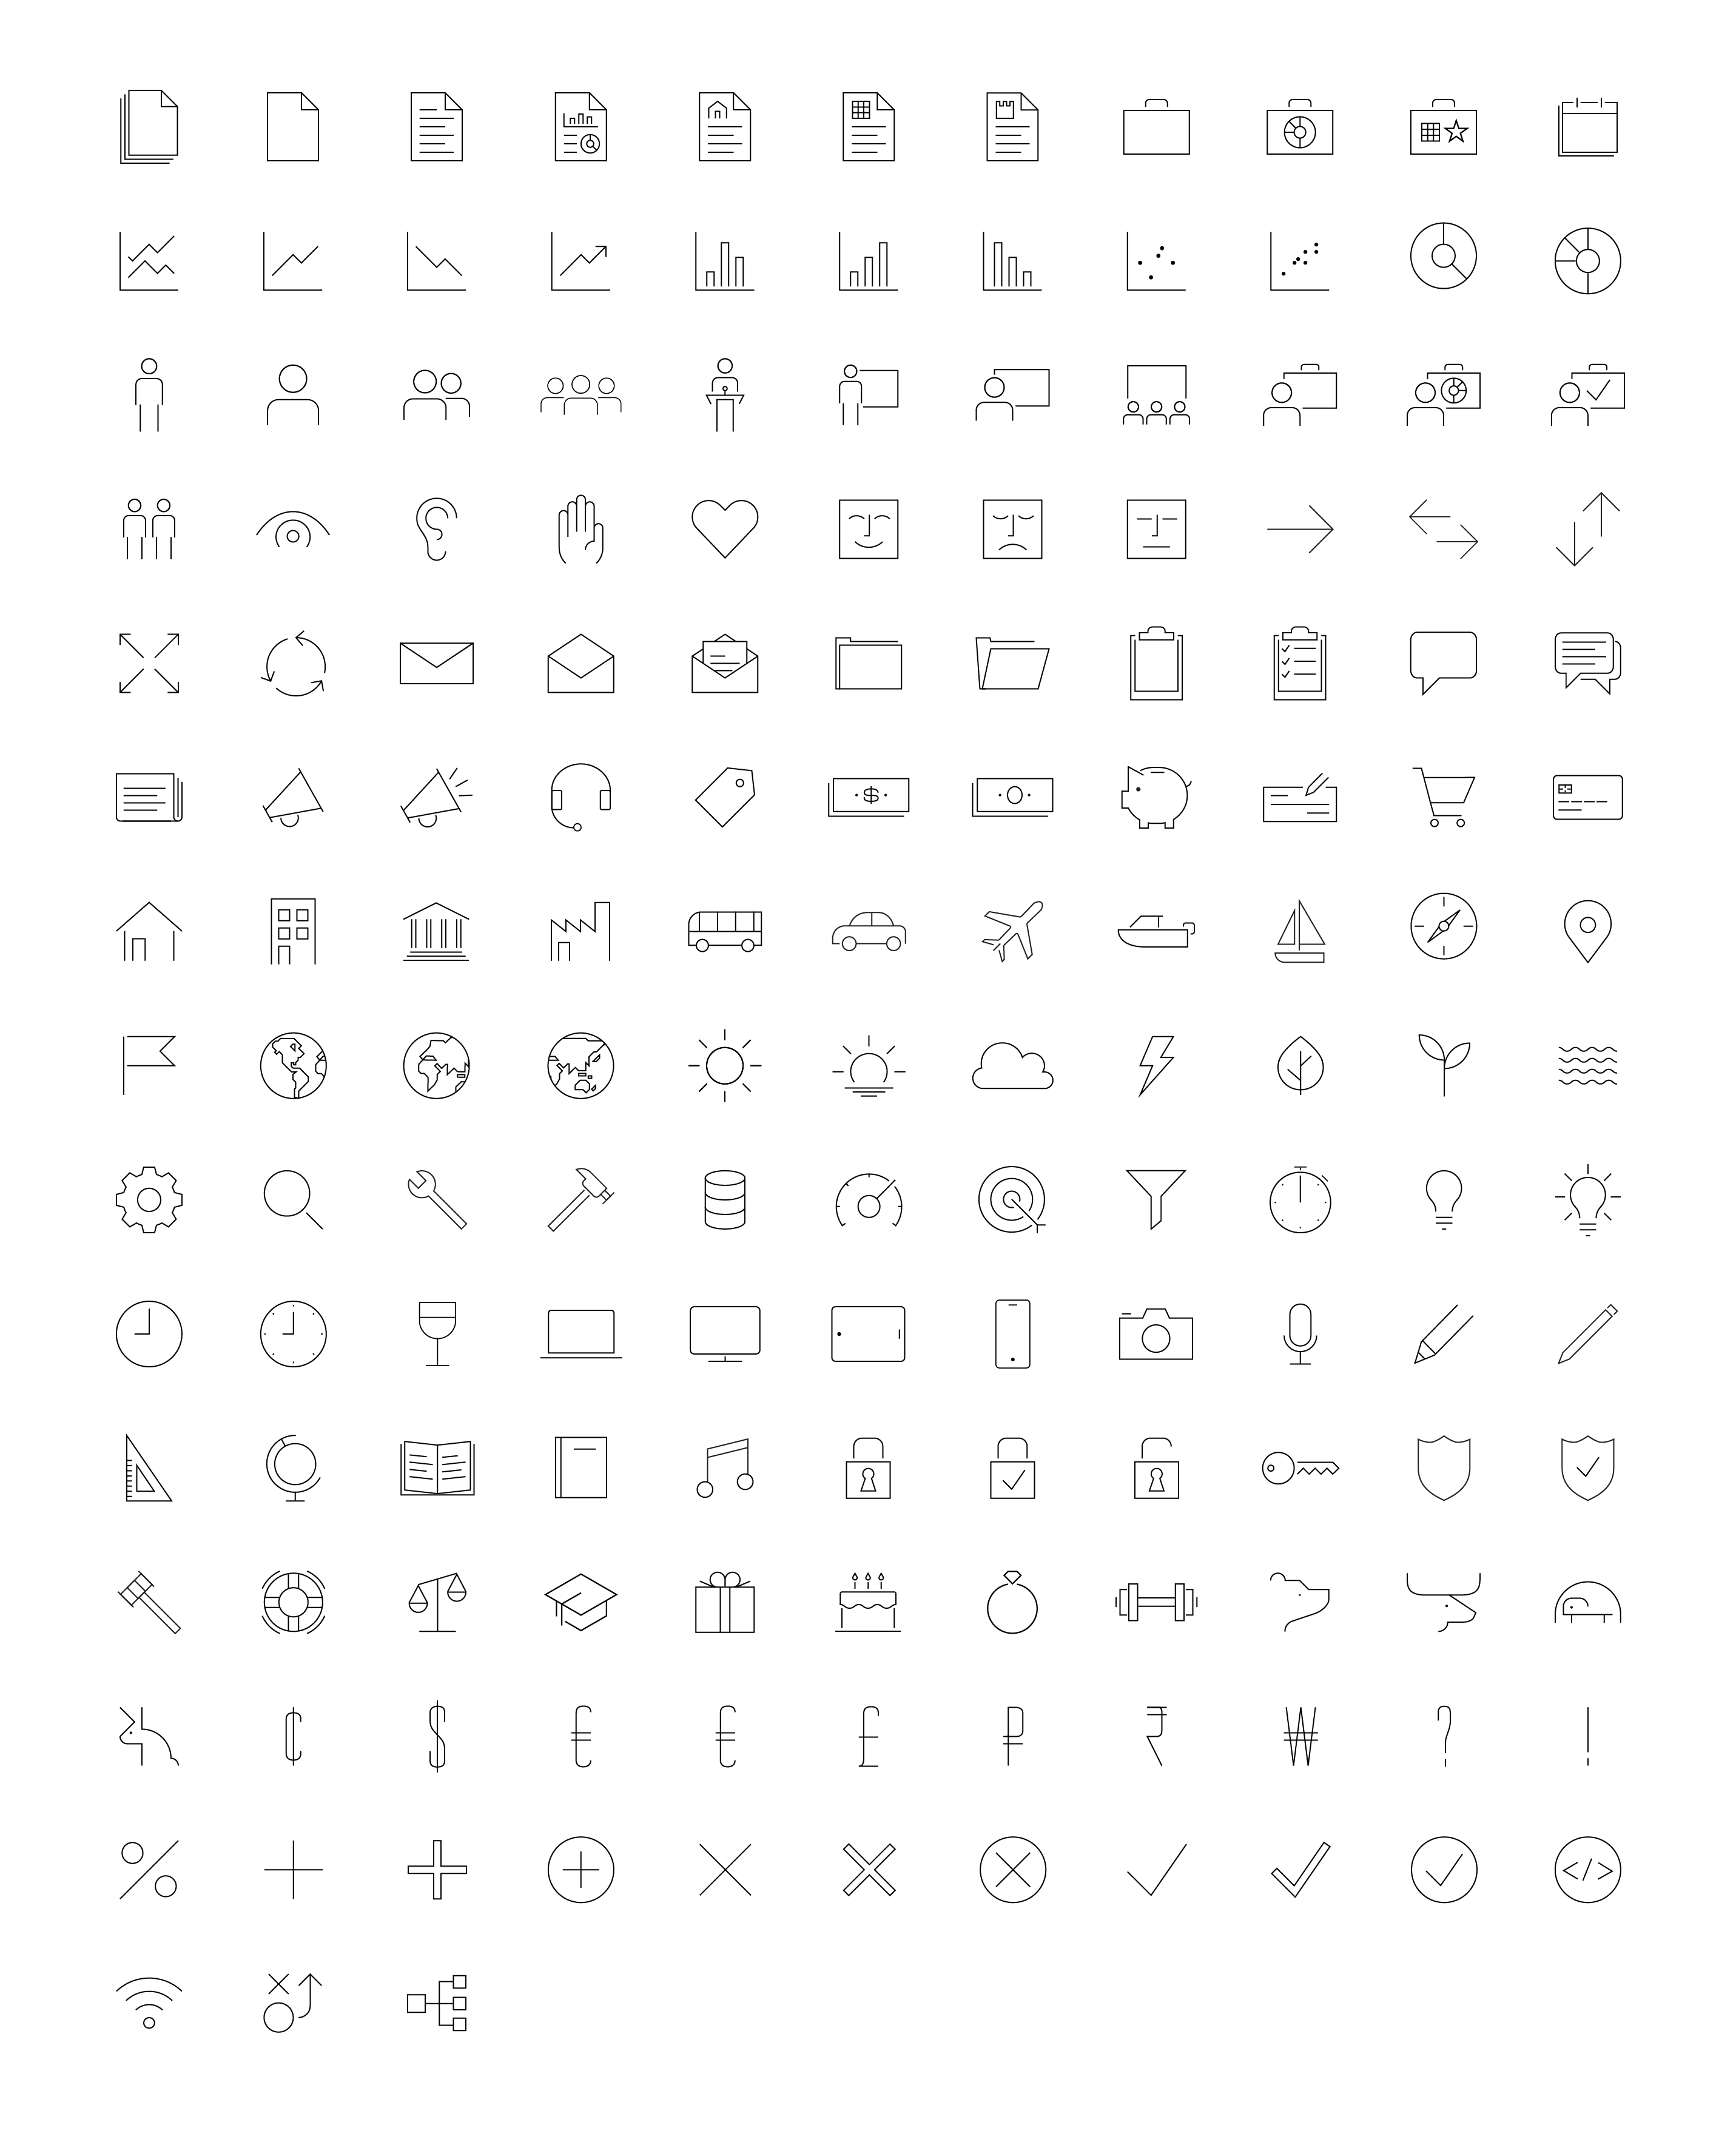 Grid displaying all available illustrative icons.